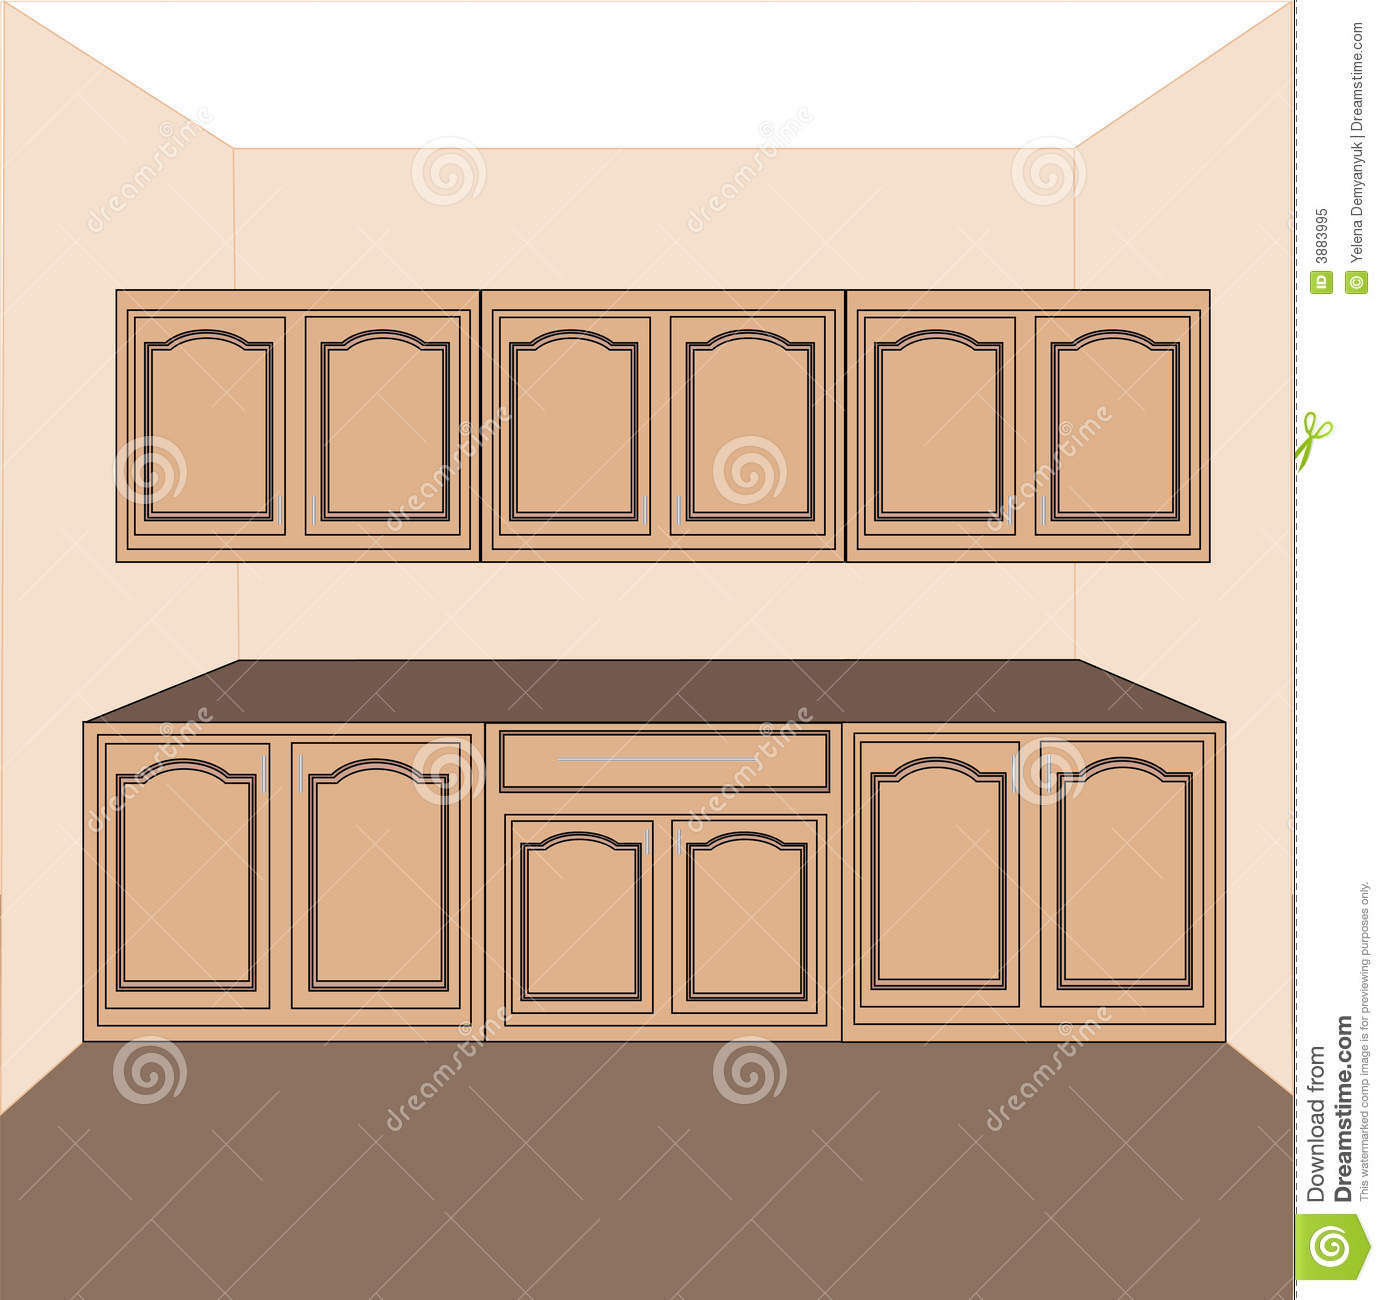 Storage Cabinet Clipart Kitchen Laundry Cabinets